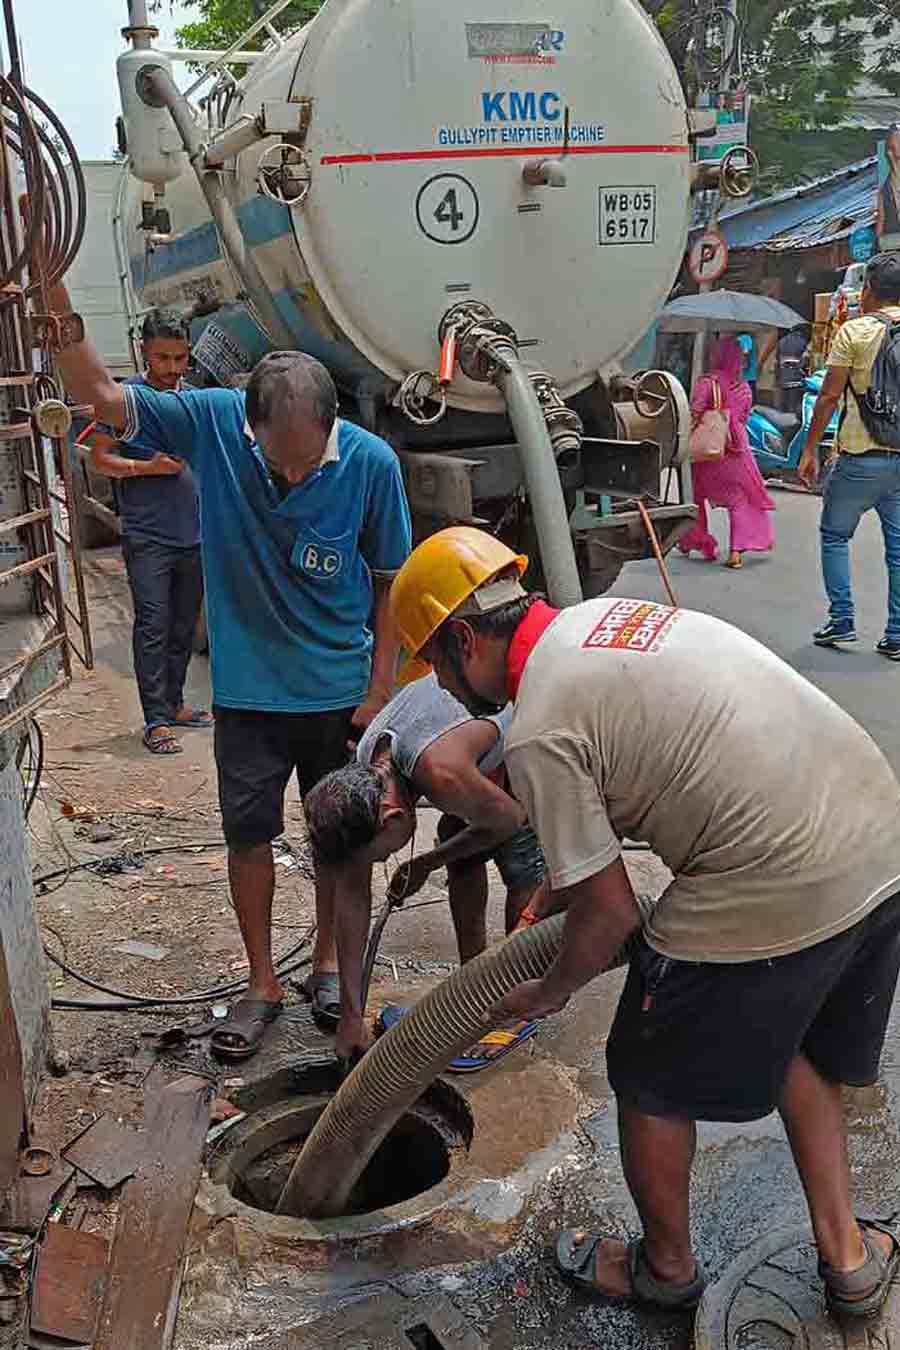 Kolkata Municipal Corporation personnel operate a gully-pit emptier to clear the sewerage system for smooth flow of rain and waste water in south Kolkata